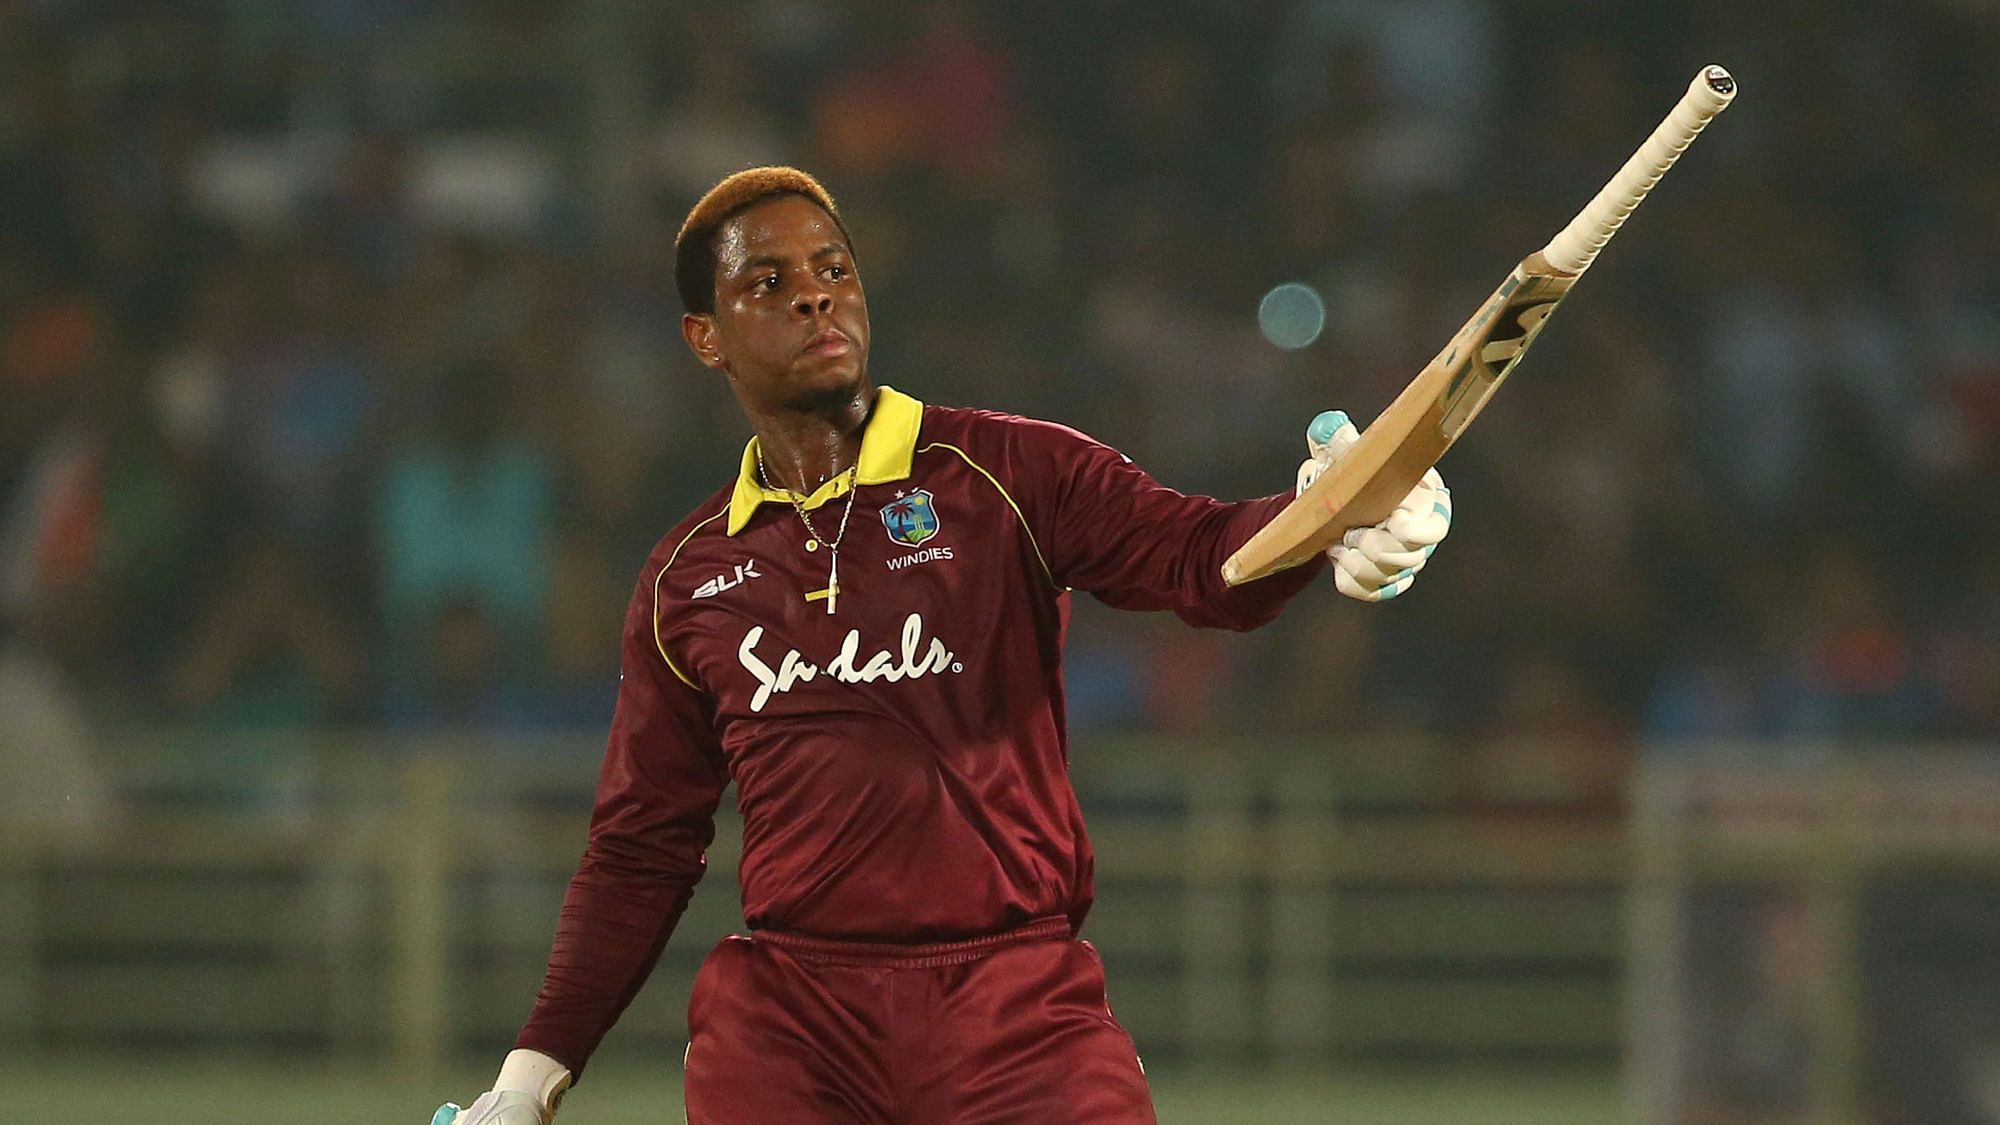 Darren Bravo, Shimron Hetmyer and Keemo Paul have refused to tour England for the Test series.